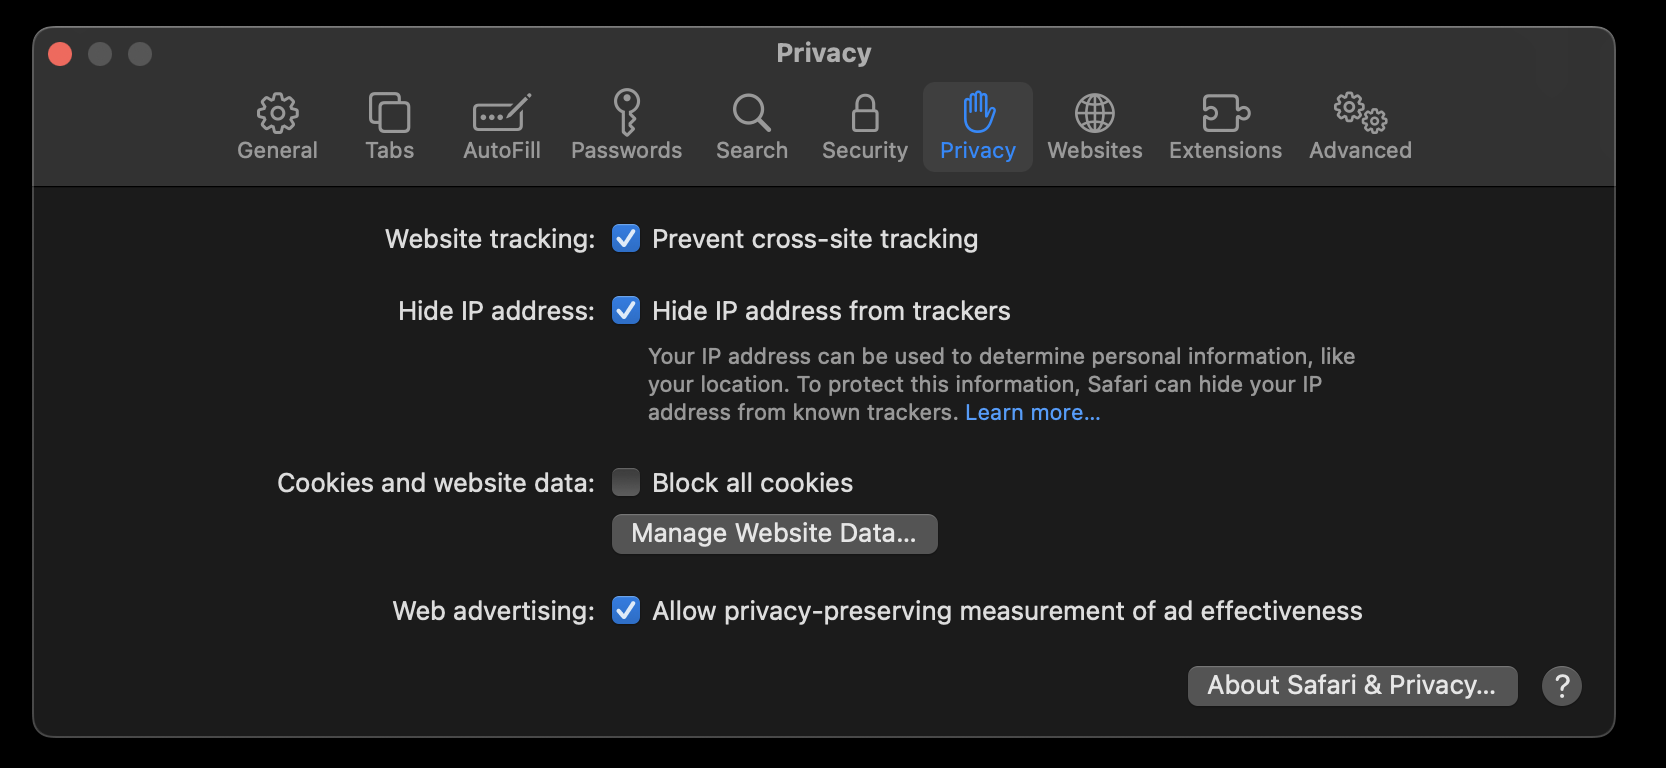 Clear web browser cookies on Safari macOS to fix Amazon website not working, opening, loading properly